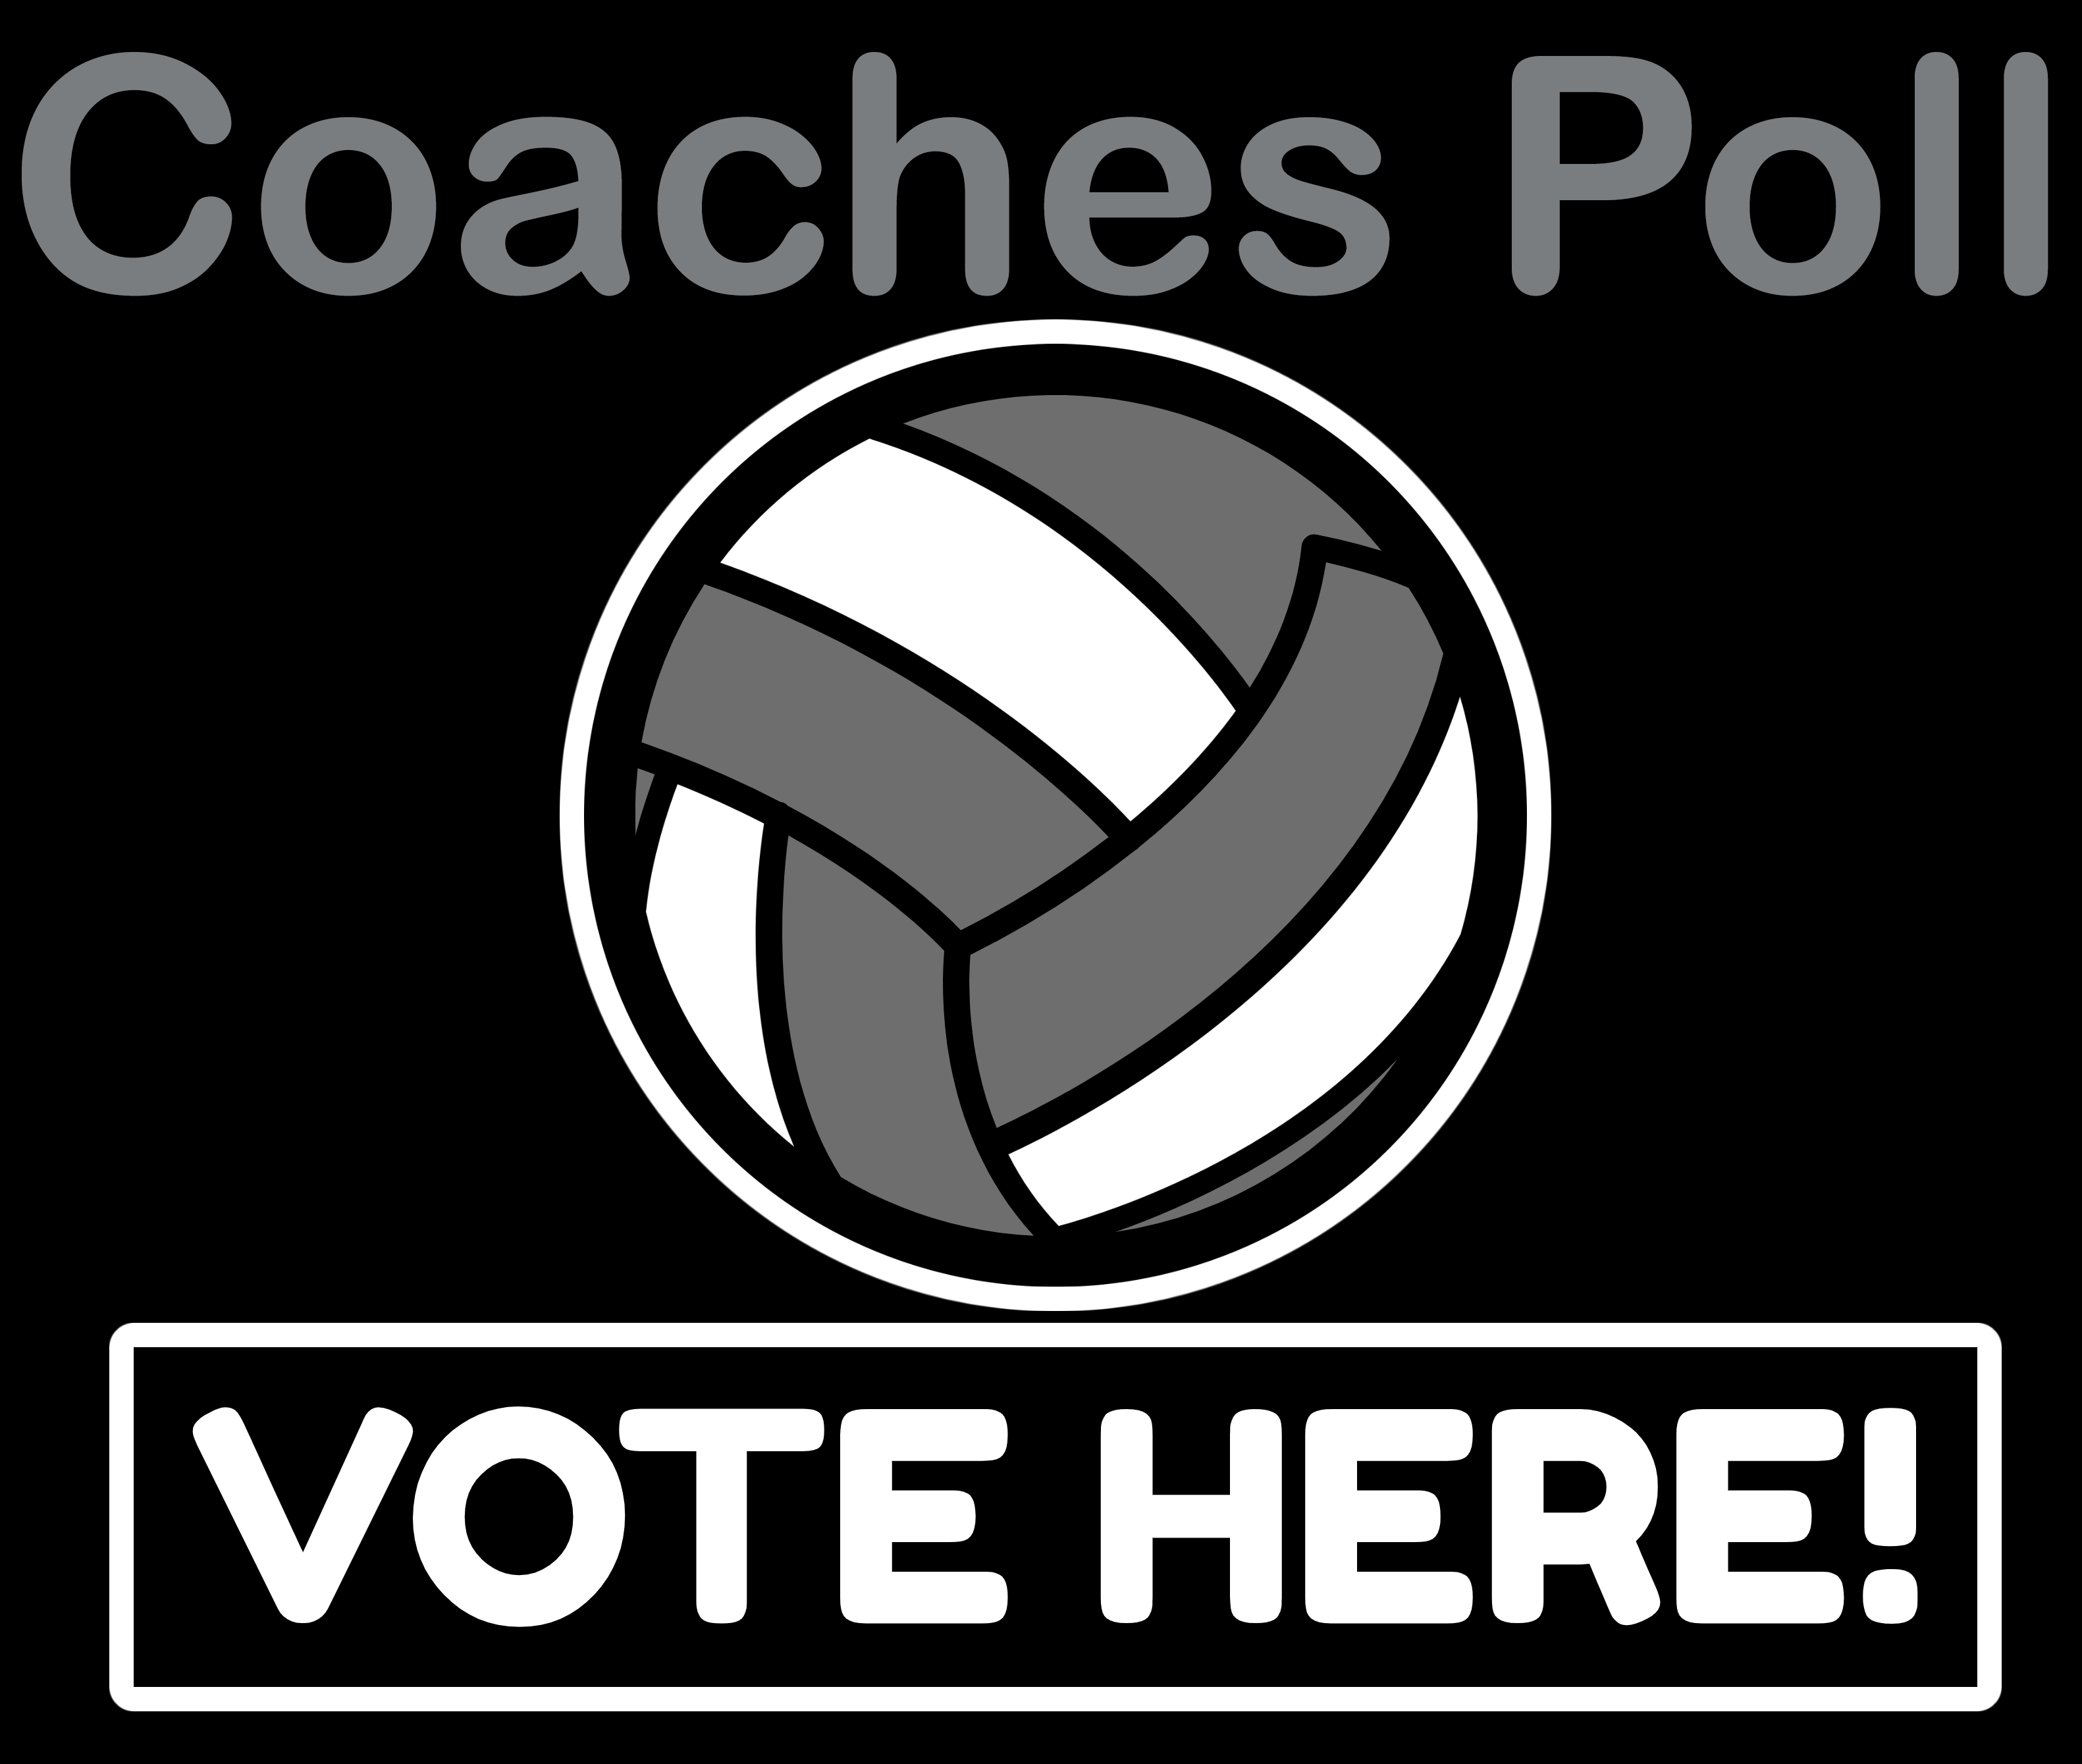 Coaches Poll - Vote Here